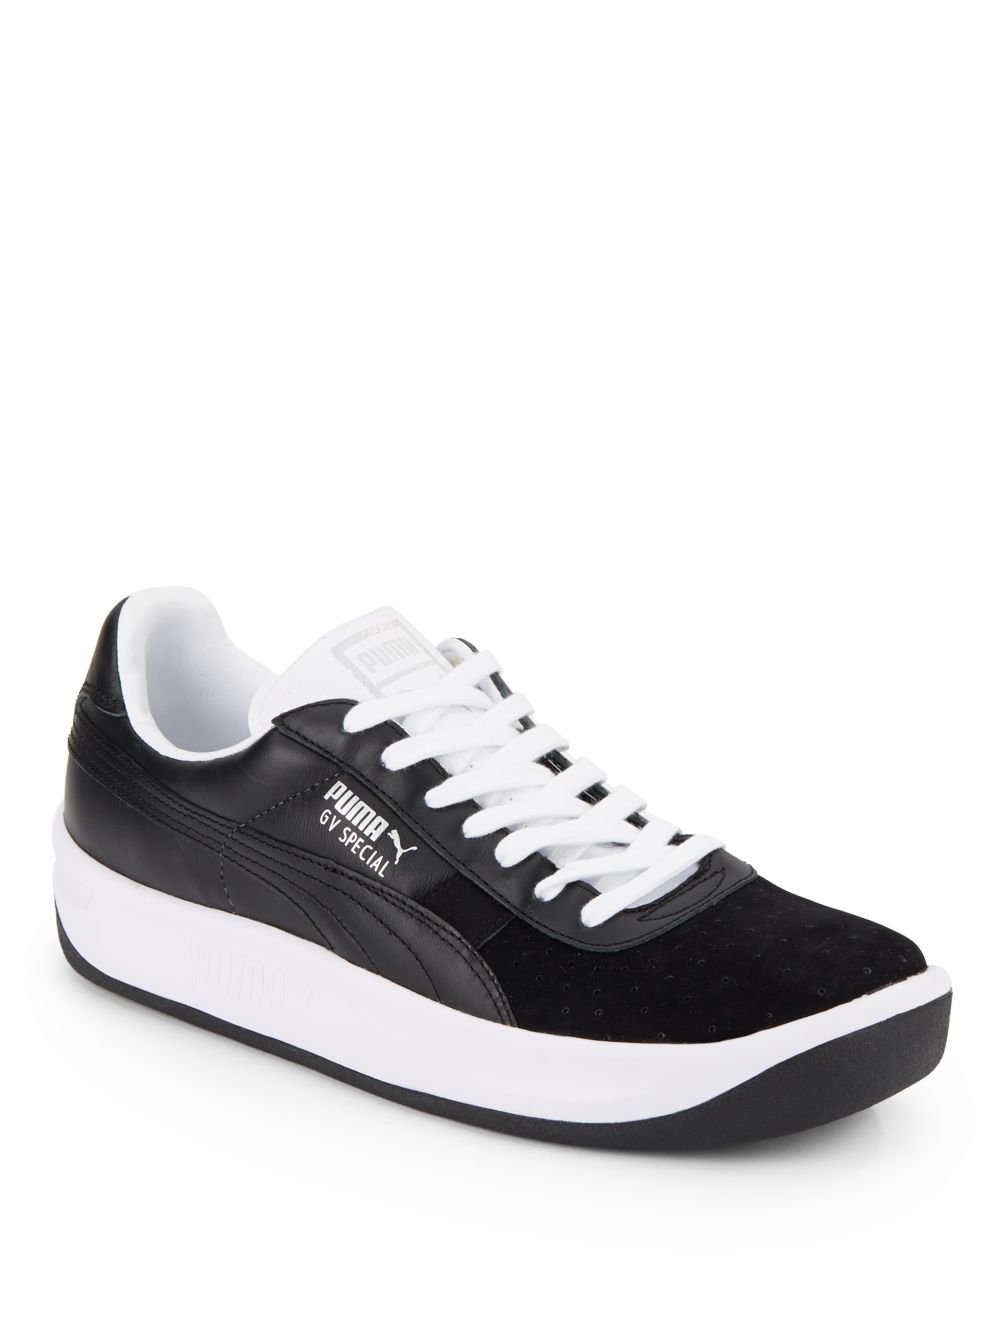 PUMA Gv Special Leather & Suede Sneakers in Black for Men - Lyst